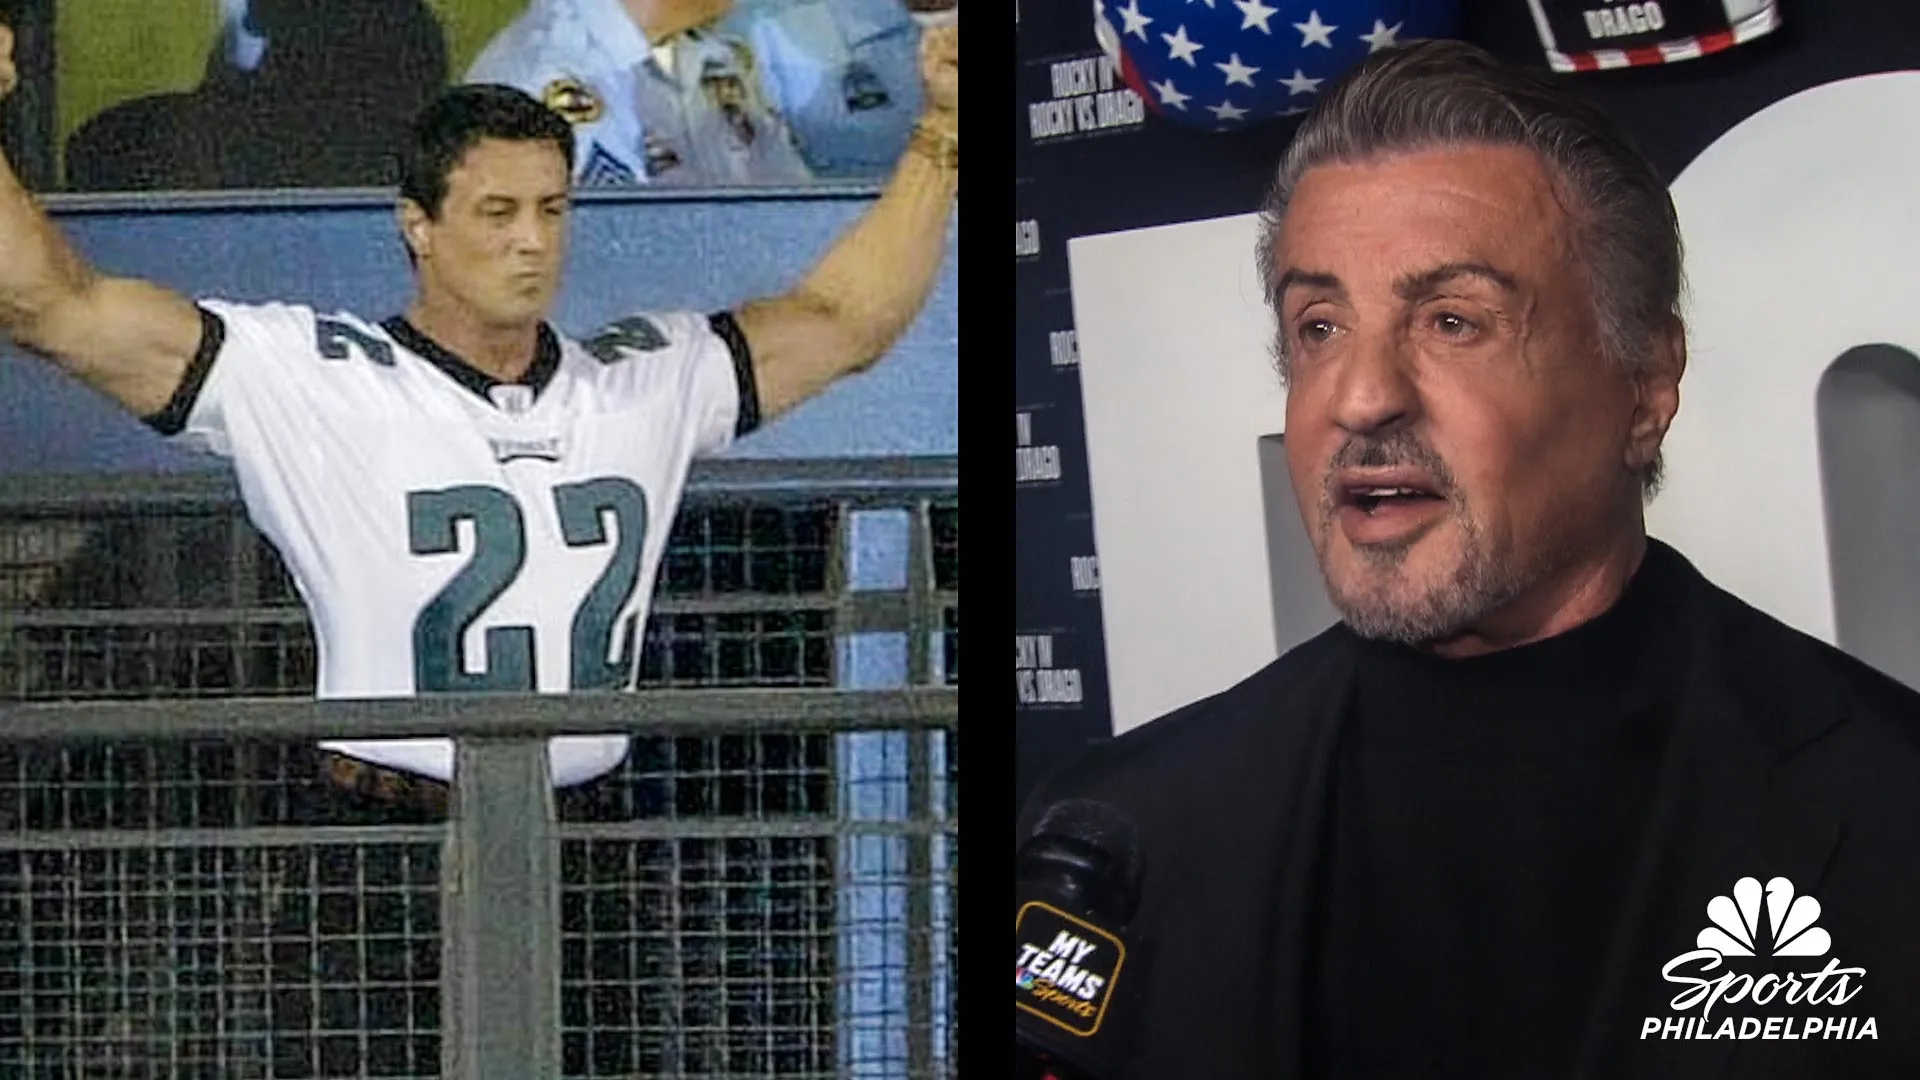 Sylvester Stallone on why he won't come back to Lincoln Financial